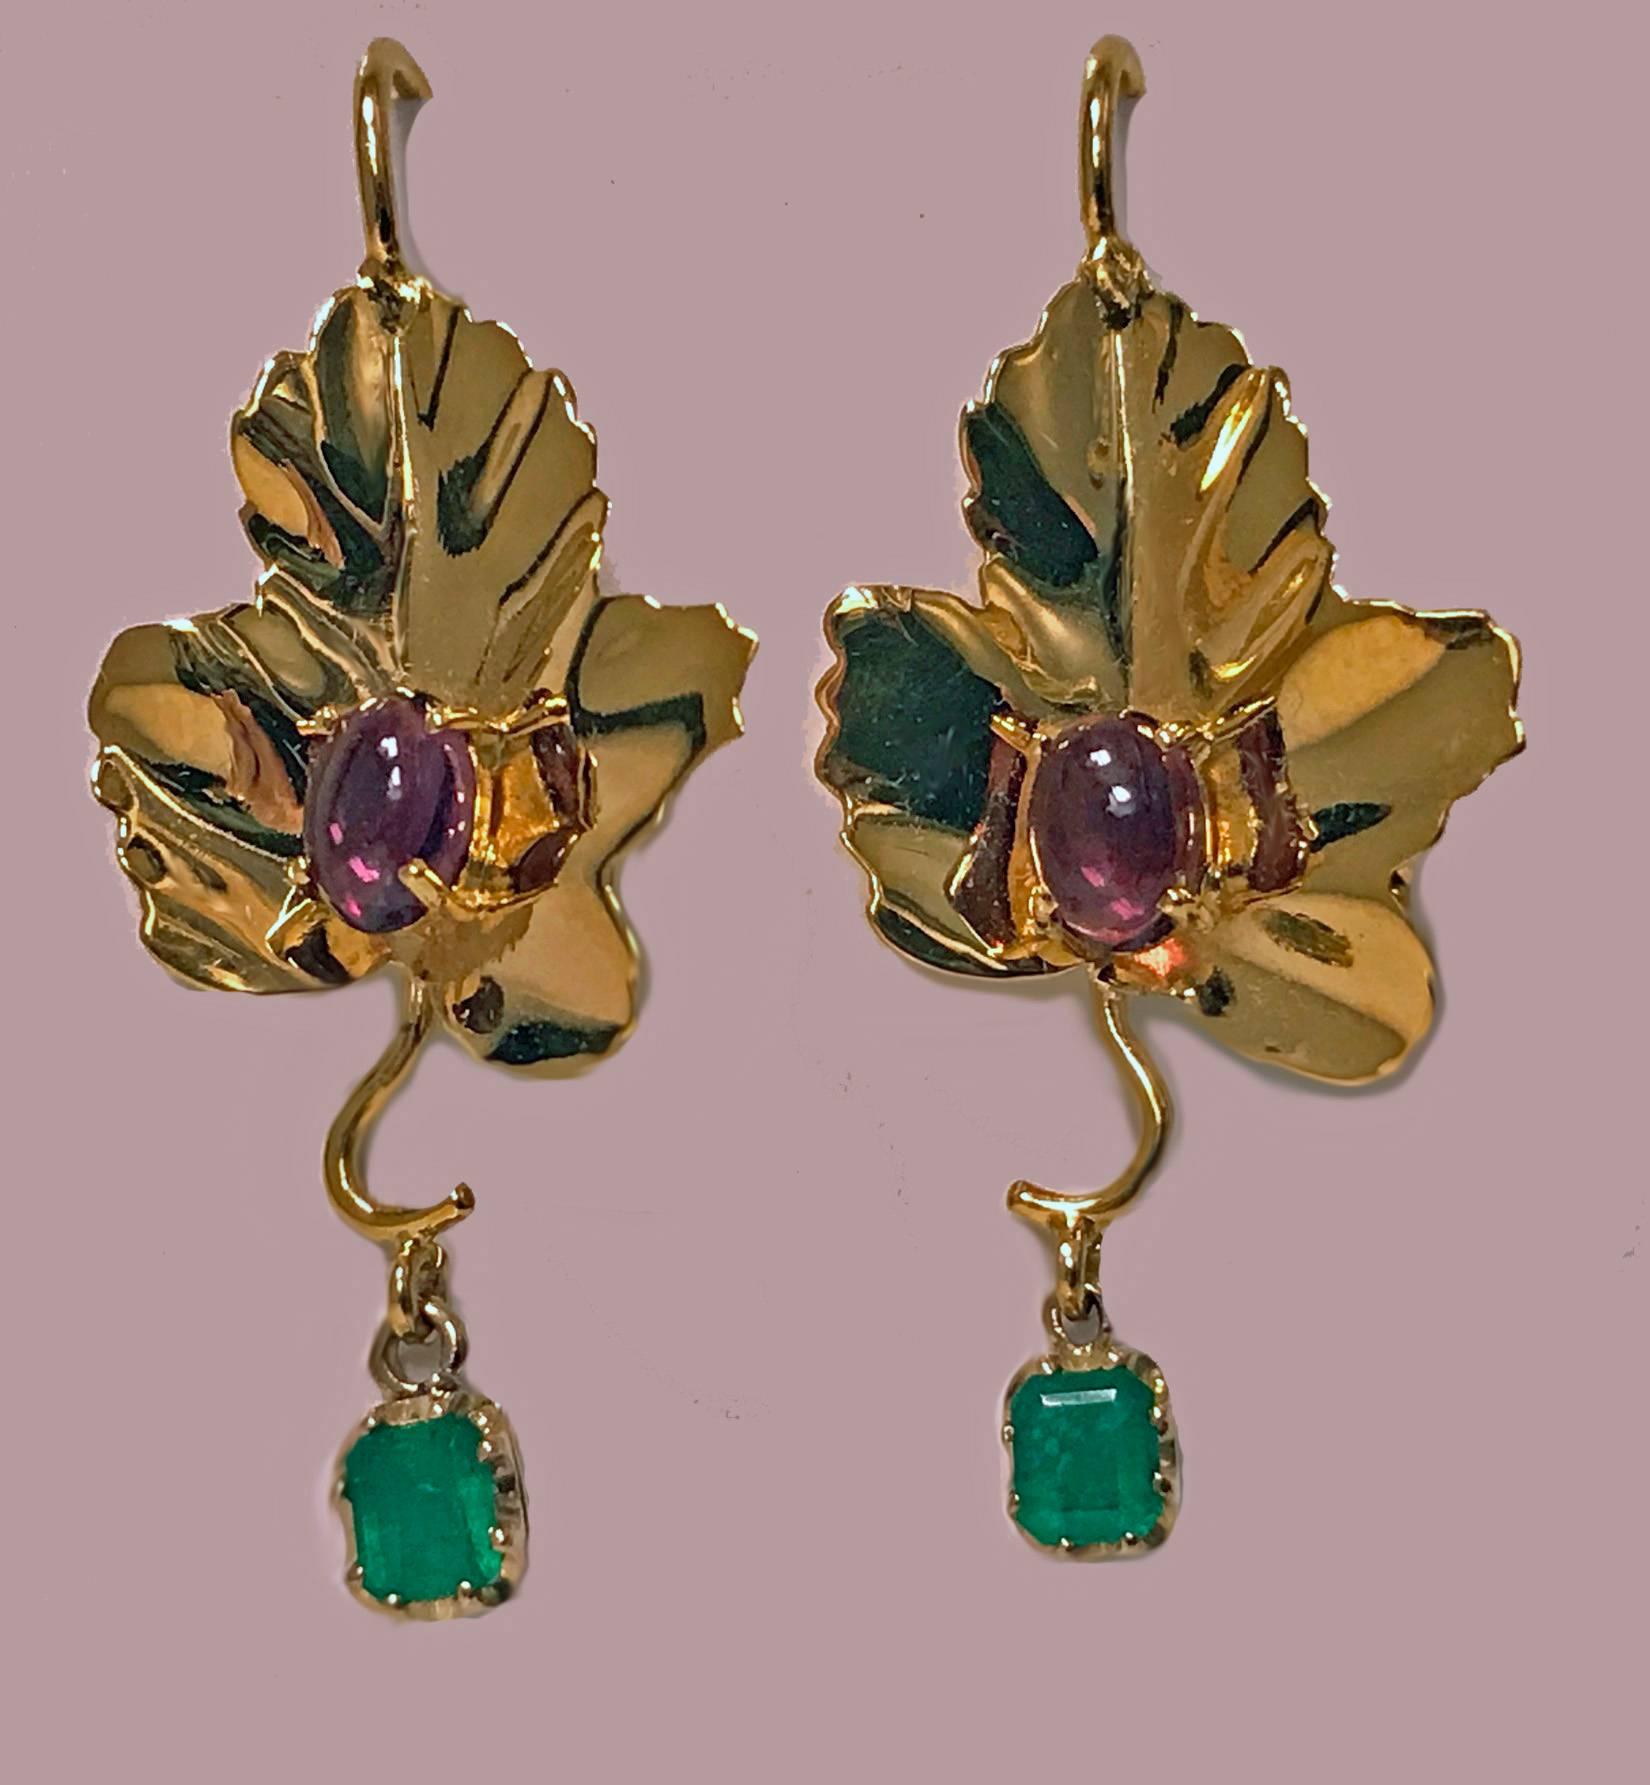 Pair of 18K Emerald and Garnet Maple Leaf drop Earrings, 20th century. The handmade Earrings each with large maple leaf set with cabochon medium pink garnet and suspending an emerald cut green emerald, total approximate weight of 0.70 ct. Hook